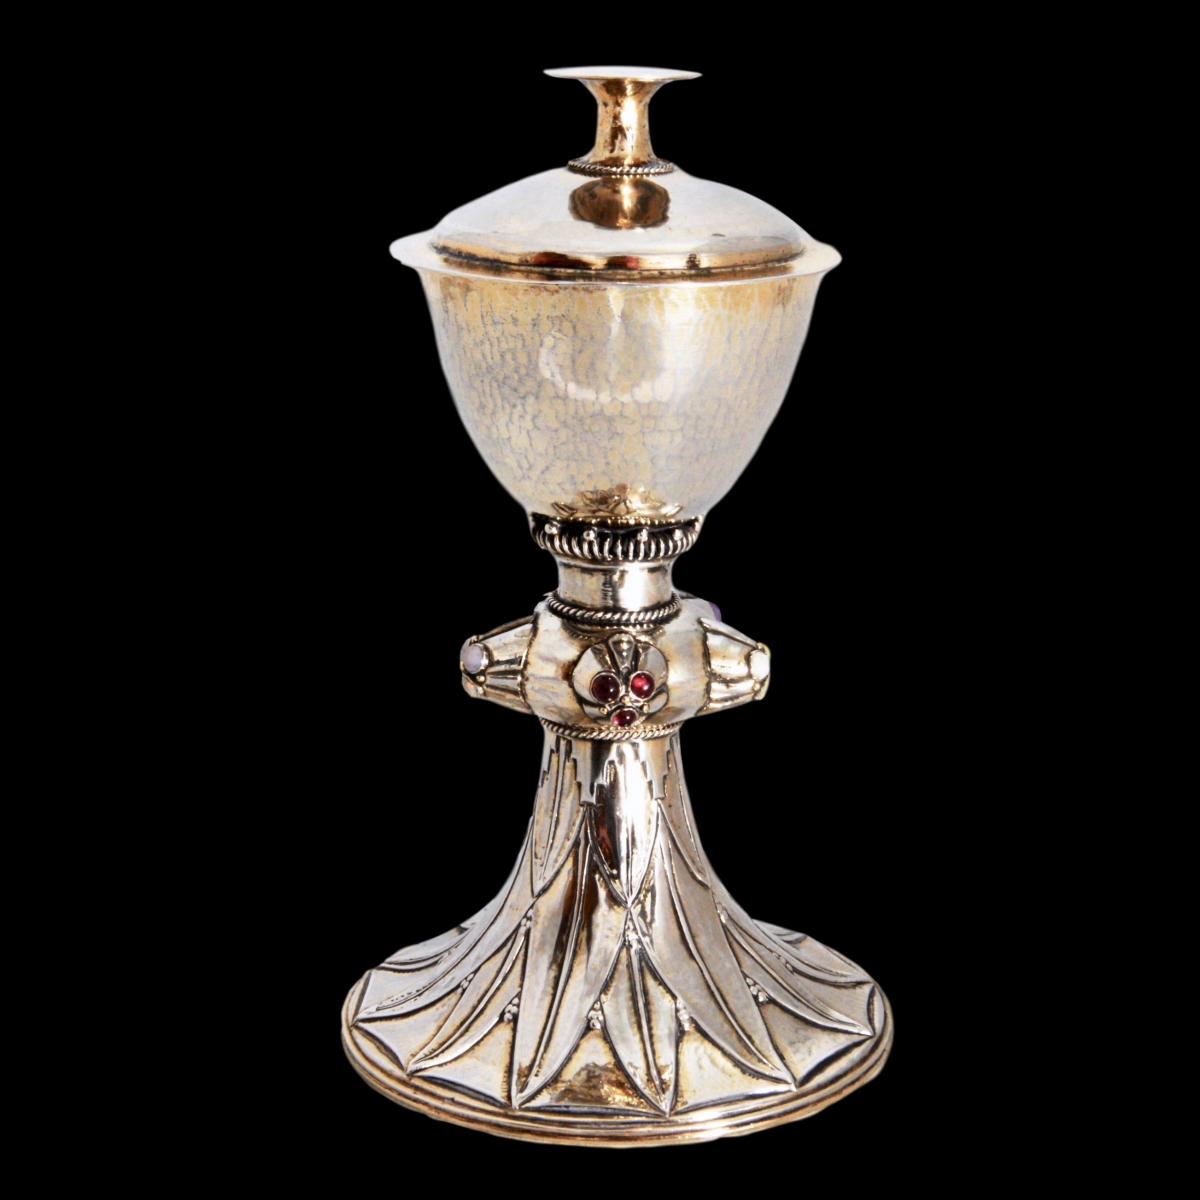 A gem set silver gilt arts and crafts chalice by Edward Spencer for the Artificers Guild